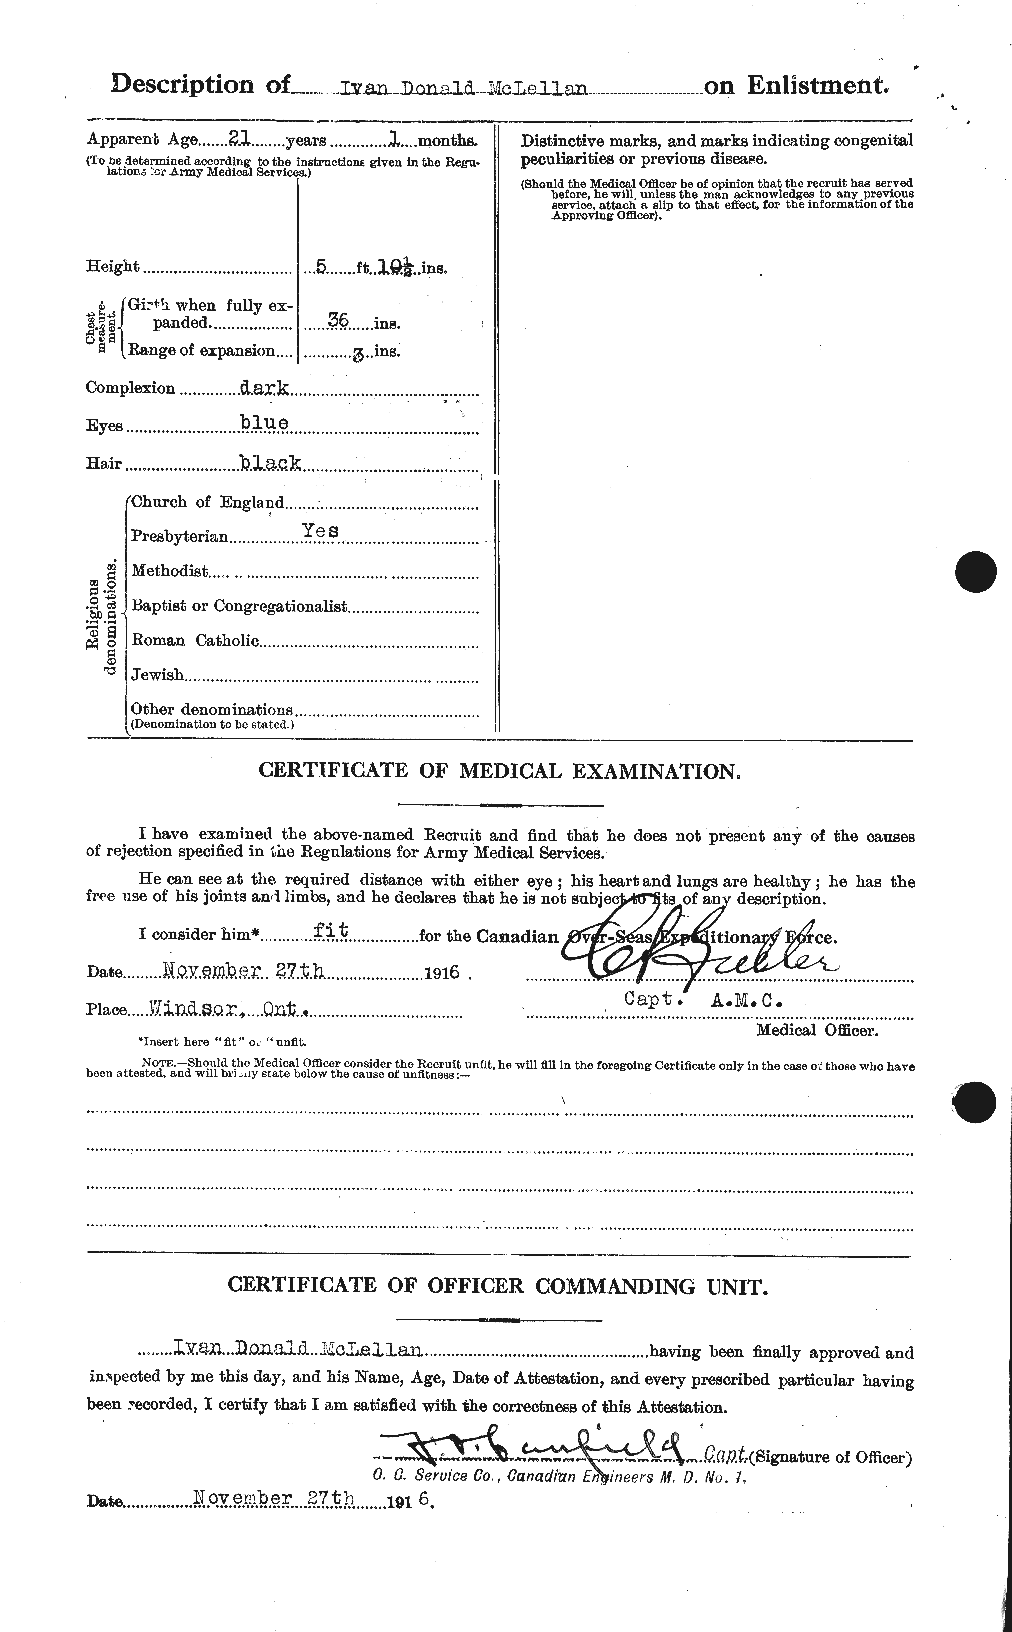 Personnel Records of the First World War - CEF 535504b